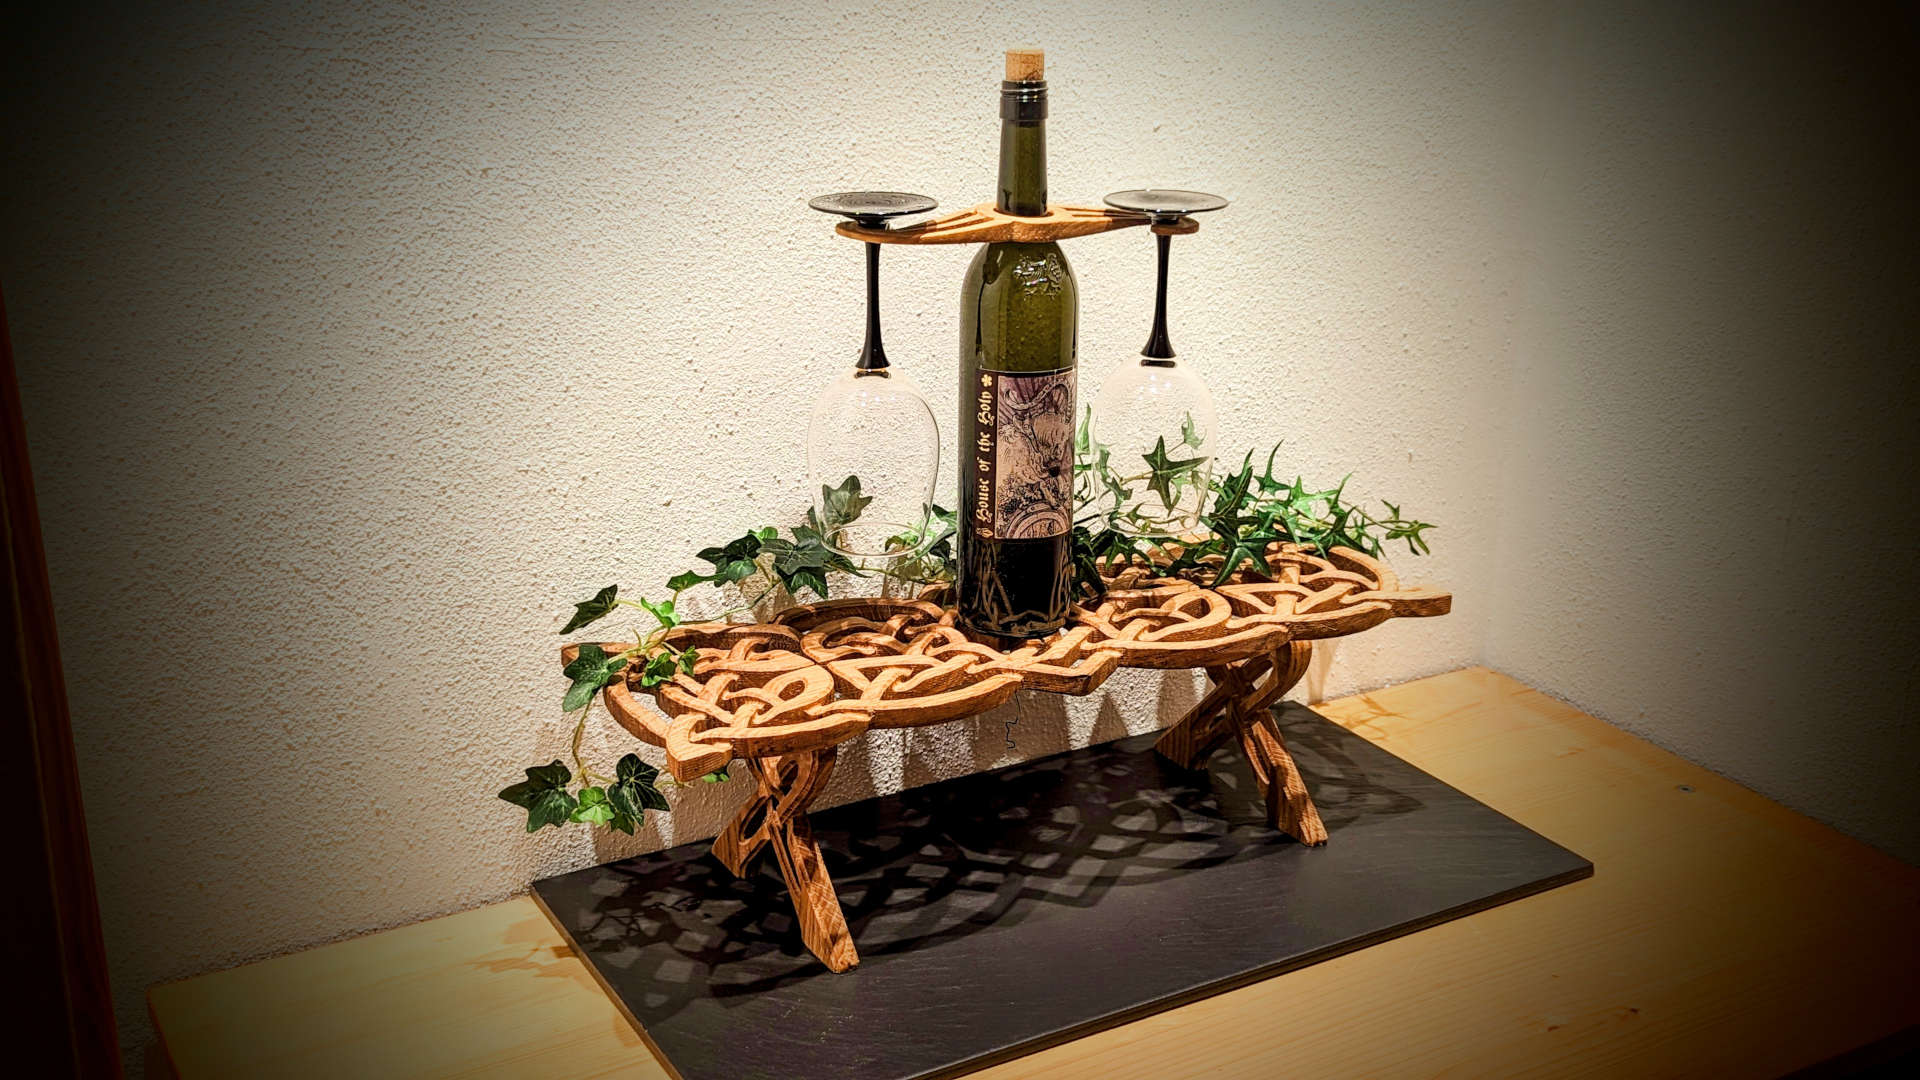 An oak table centrepiece carved in Celtic style with a wine bottle on top.